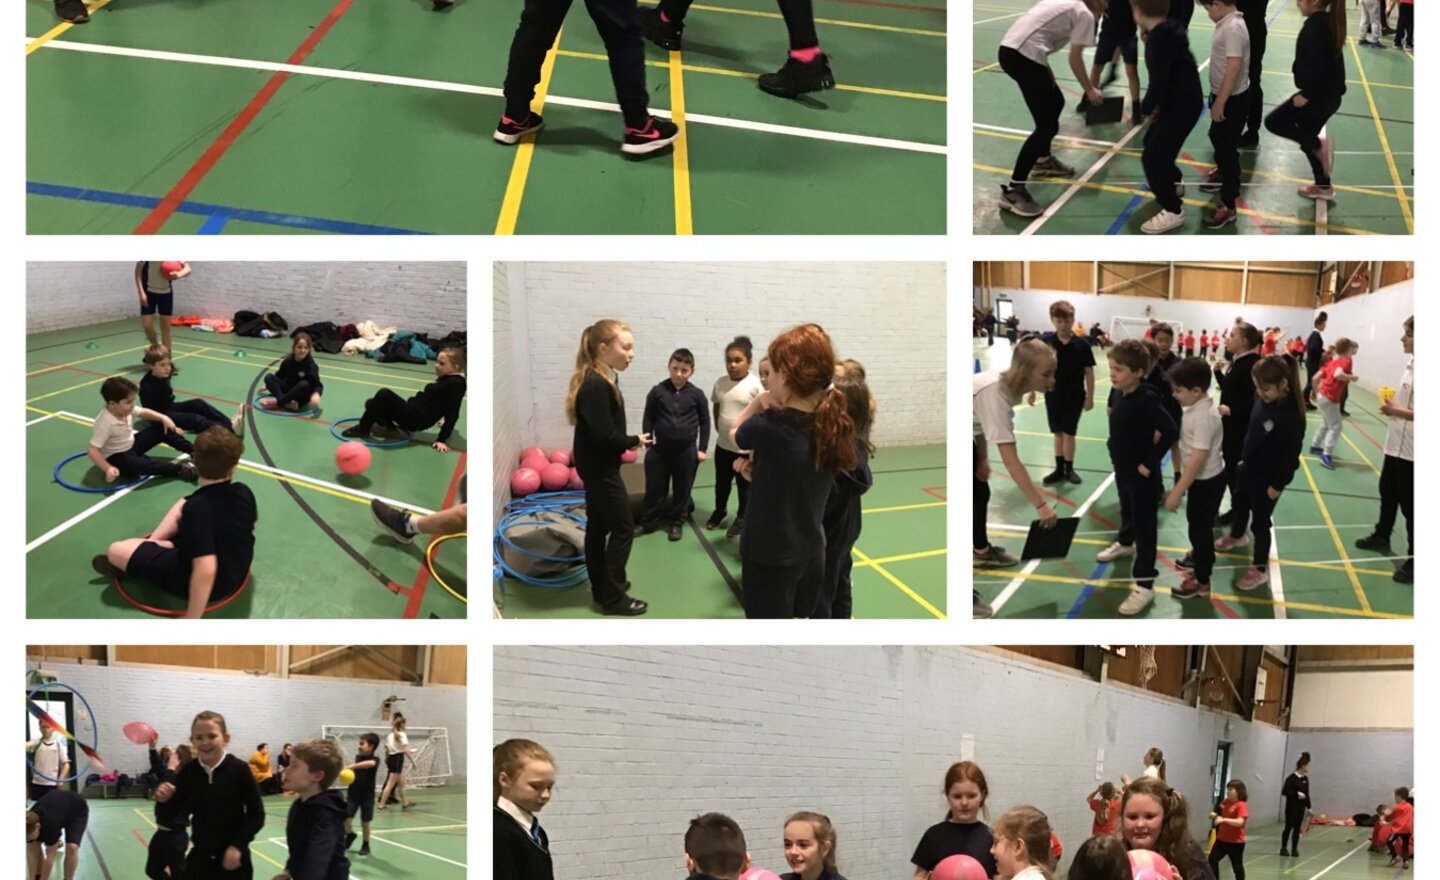 Image of Sporting fun at Stokesley School